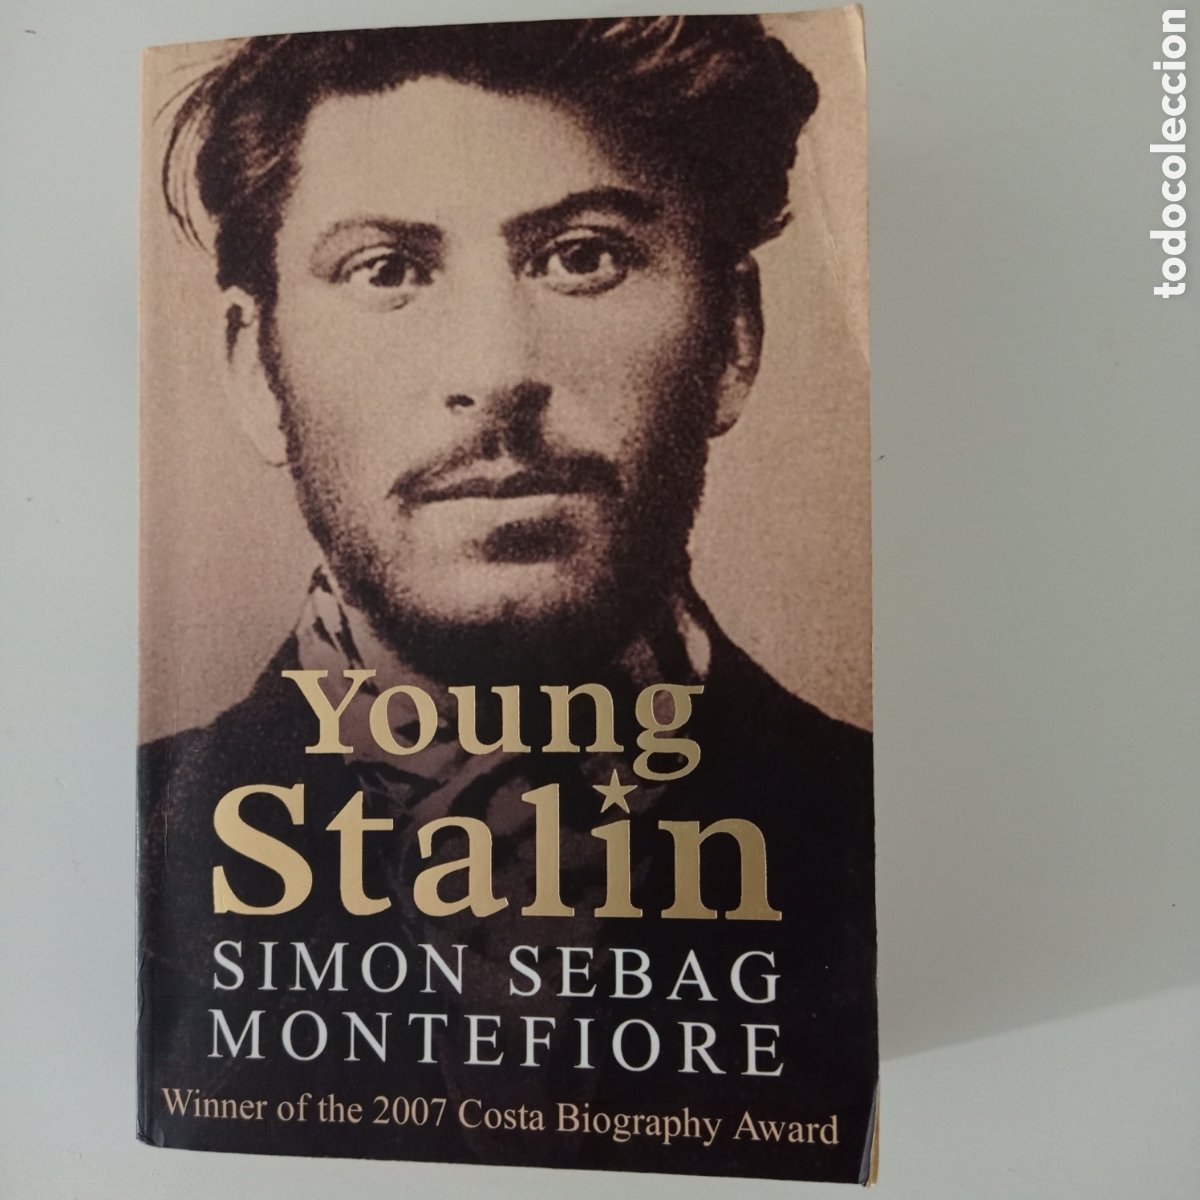 inglés　english　books　hi　Buy　Used　montefiore　sebag　history　on　todocoleccion　young　about　stalin　modern